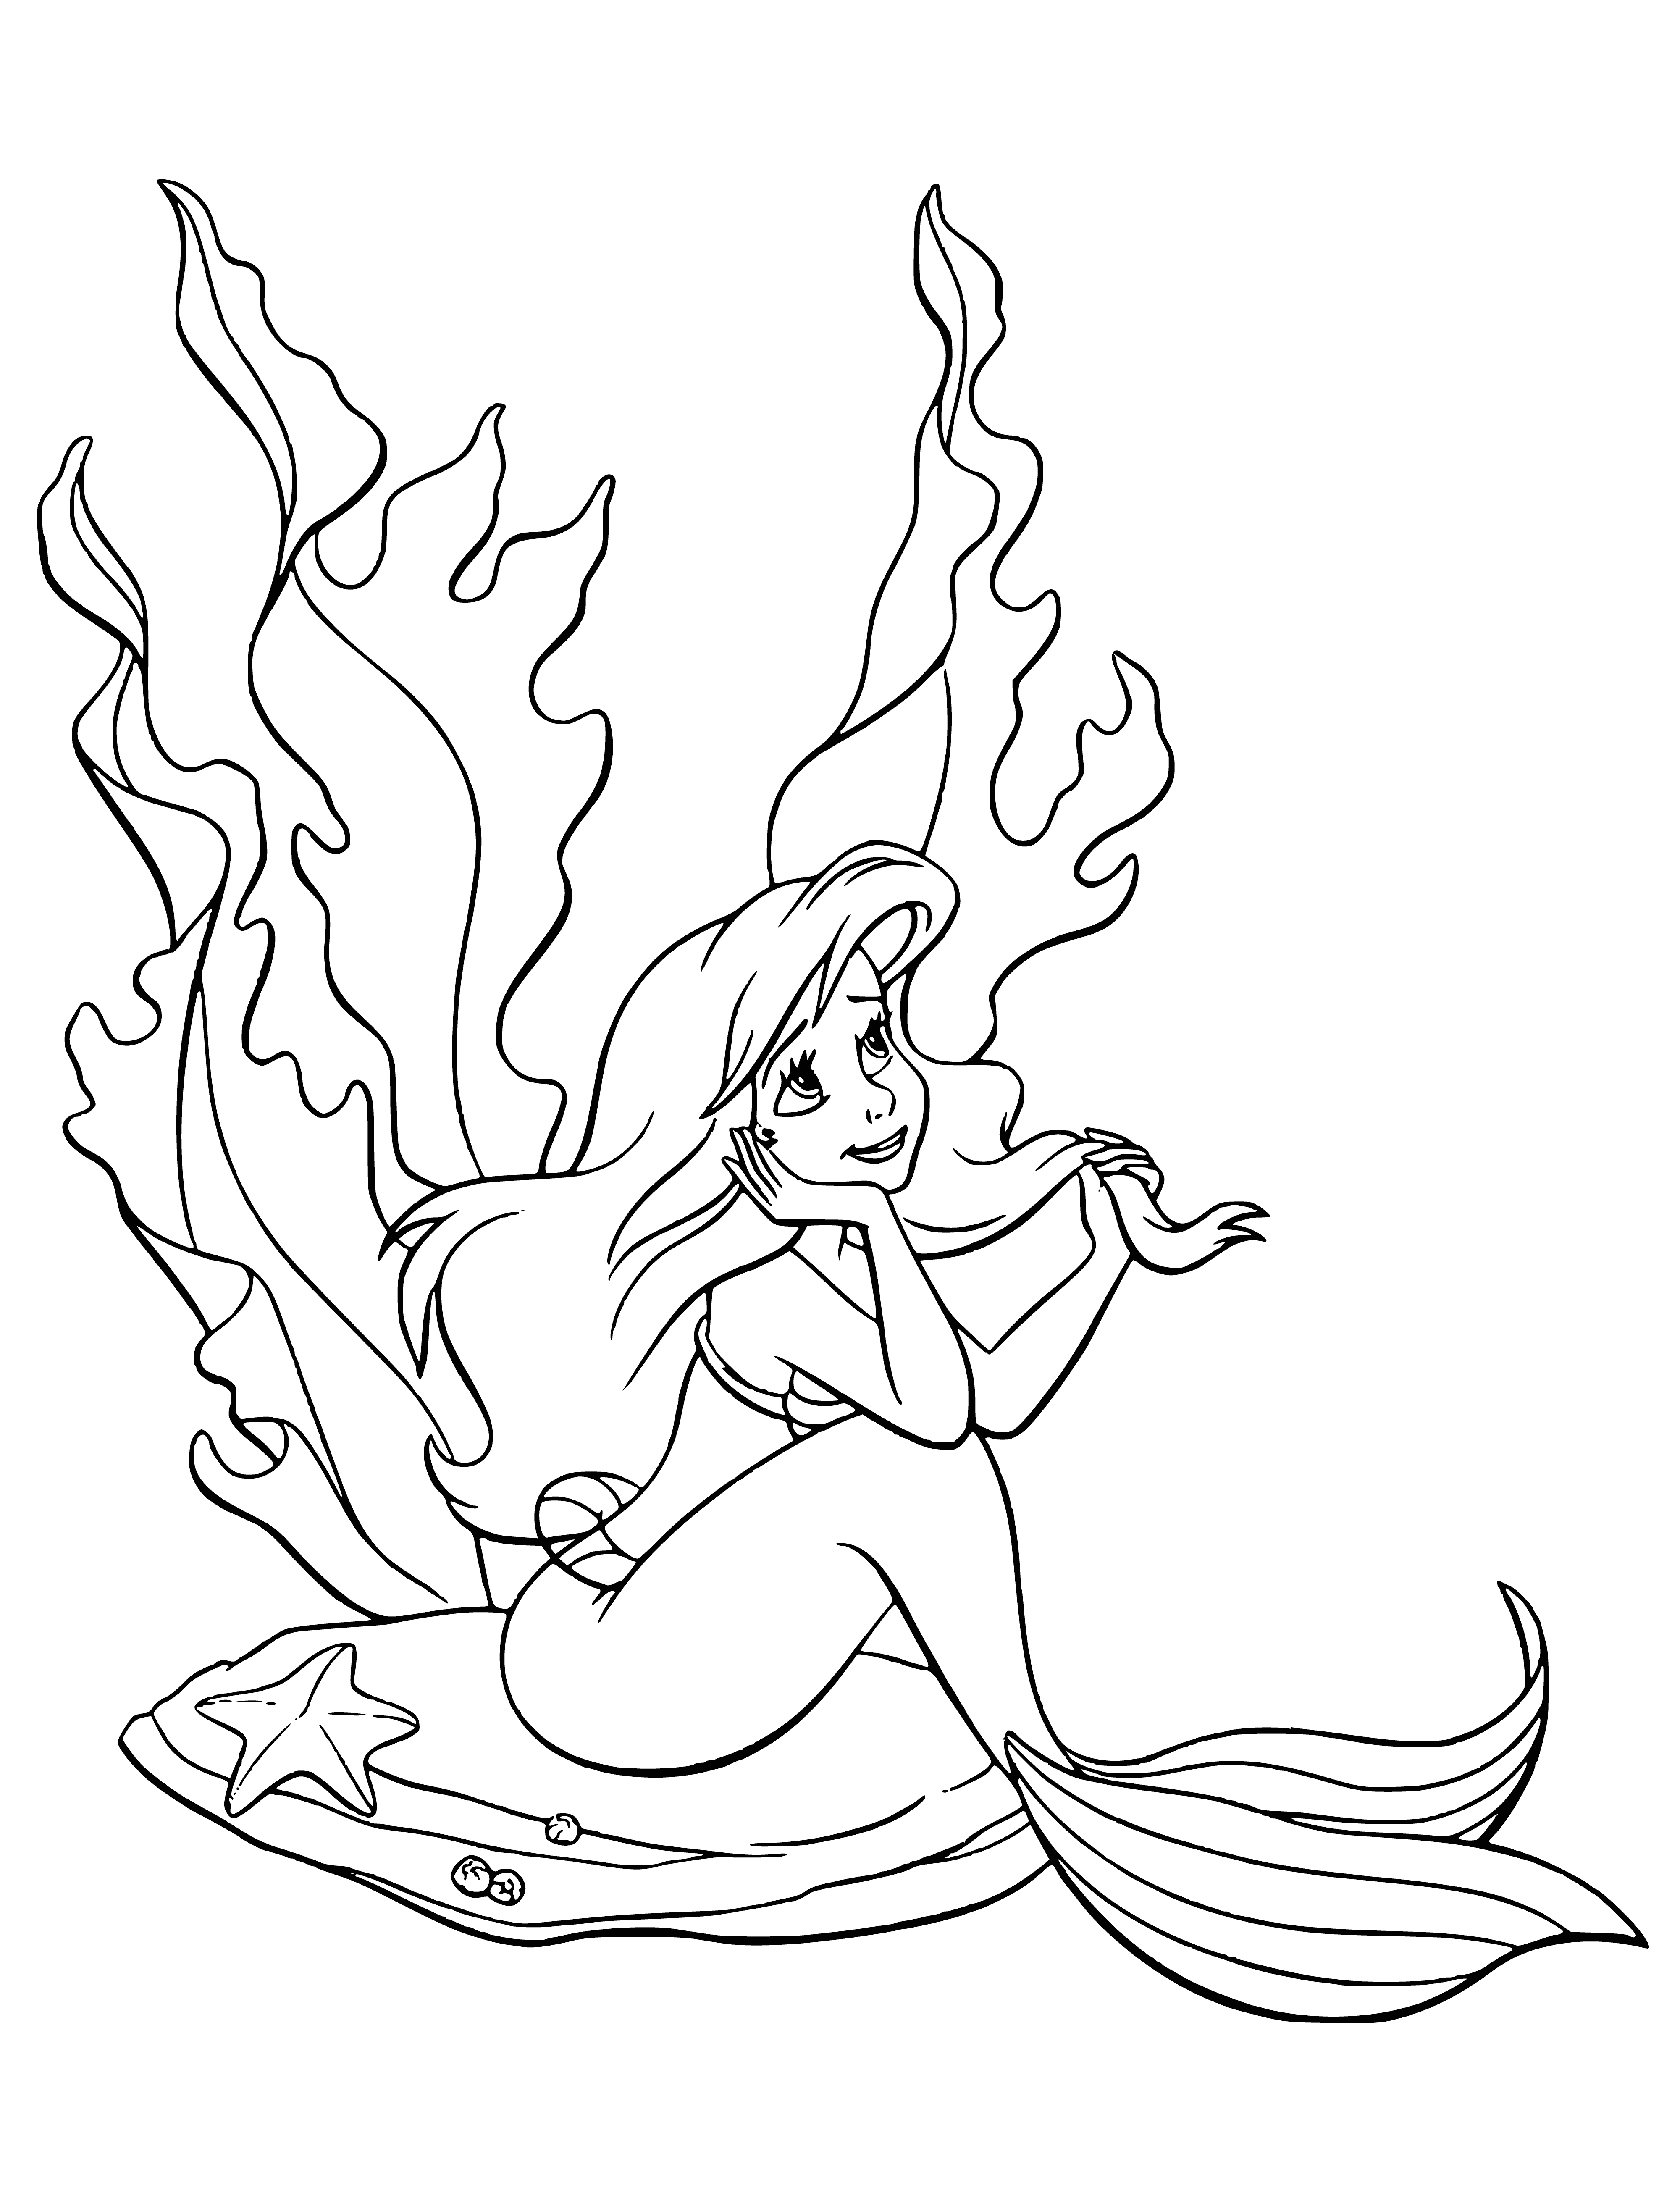 coloring page: A small mermaid sits sadly on a rock in the ocean, arms wrapped around her legs.